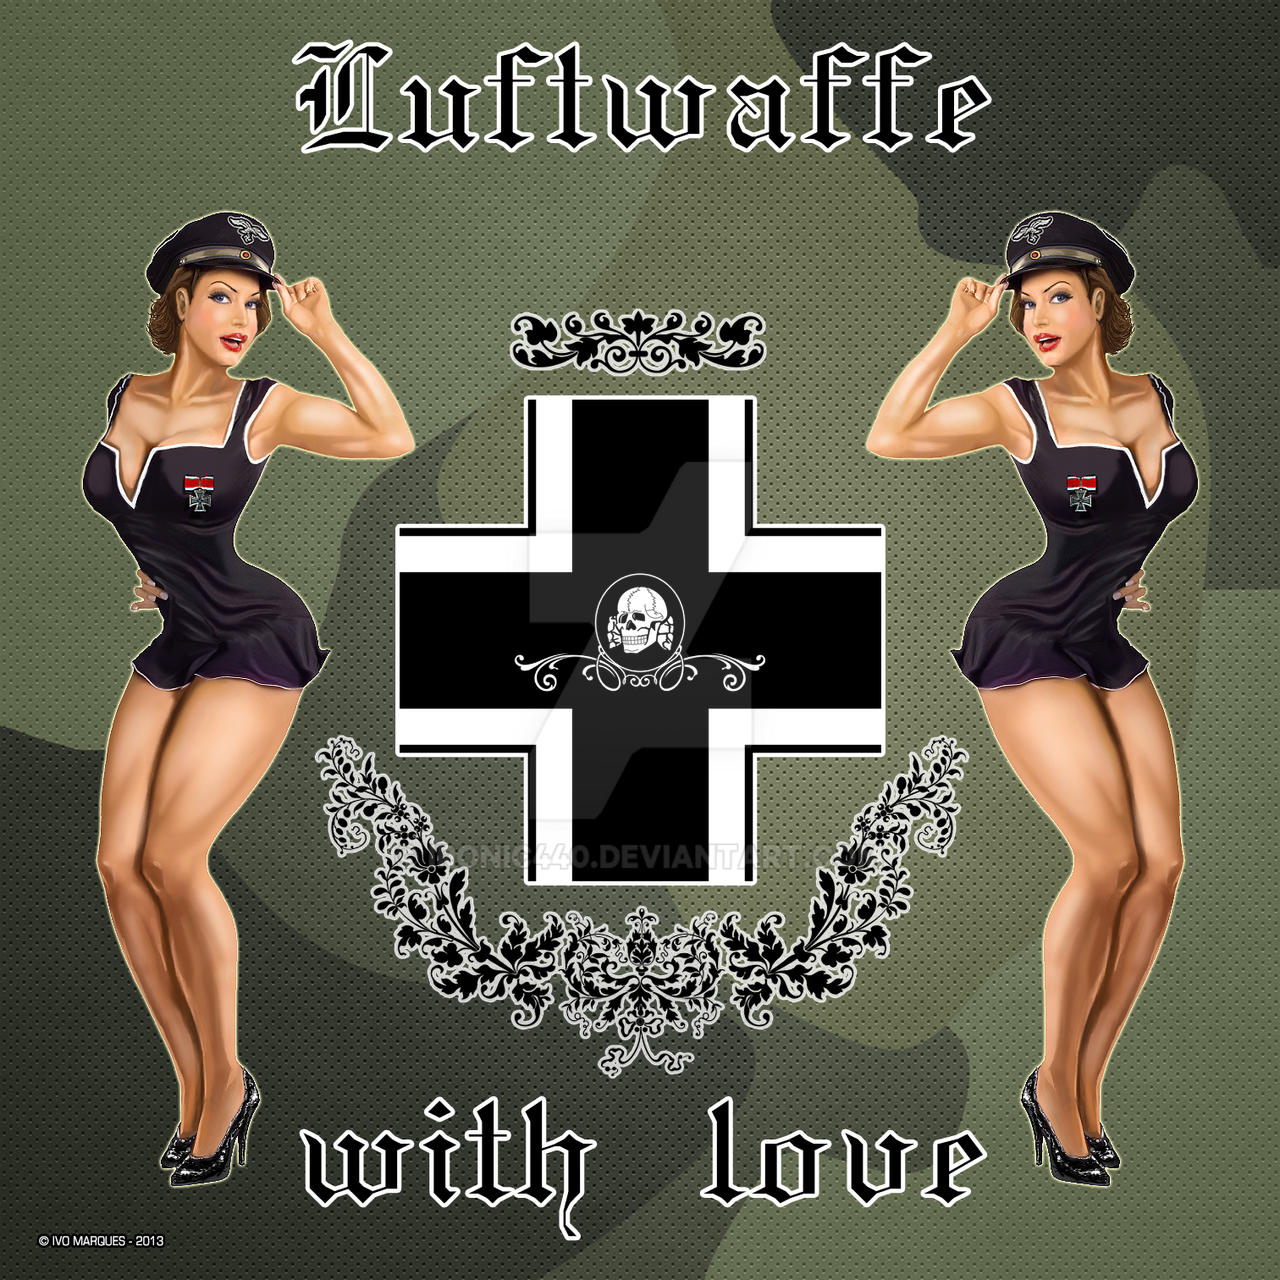 Luftwaffe With Love